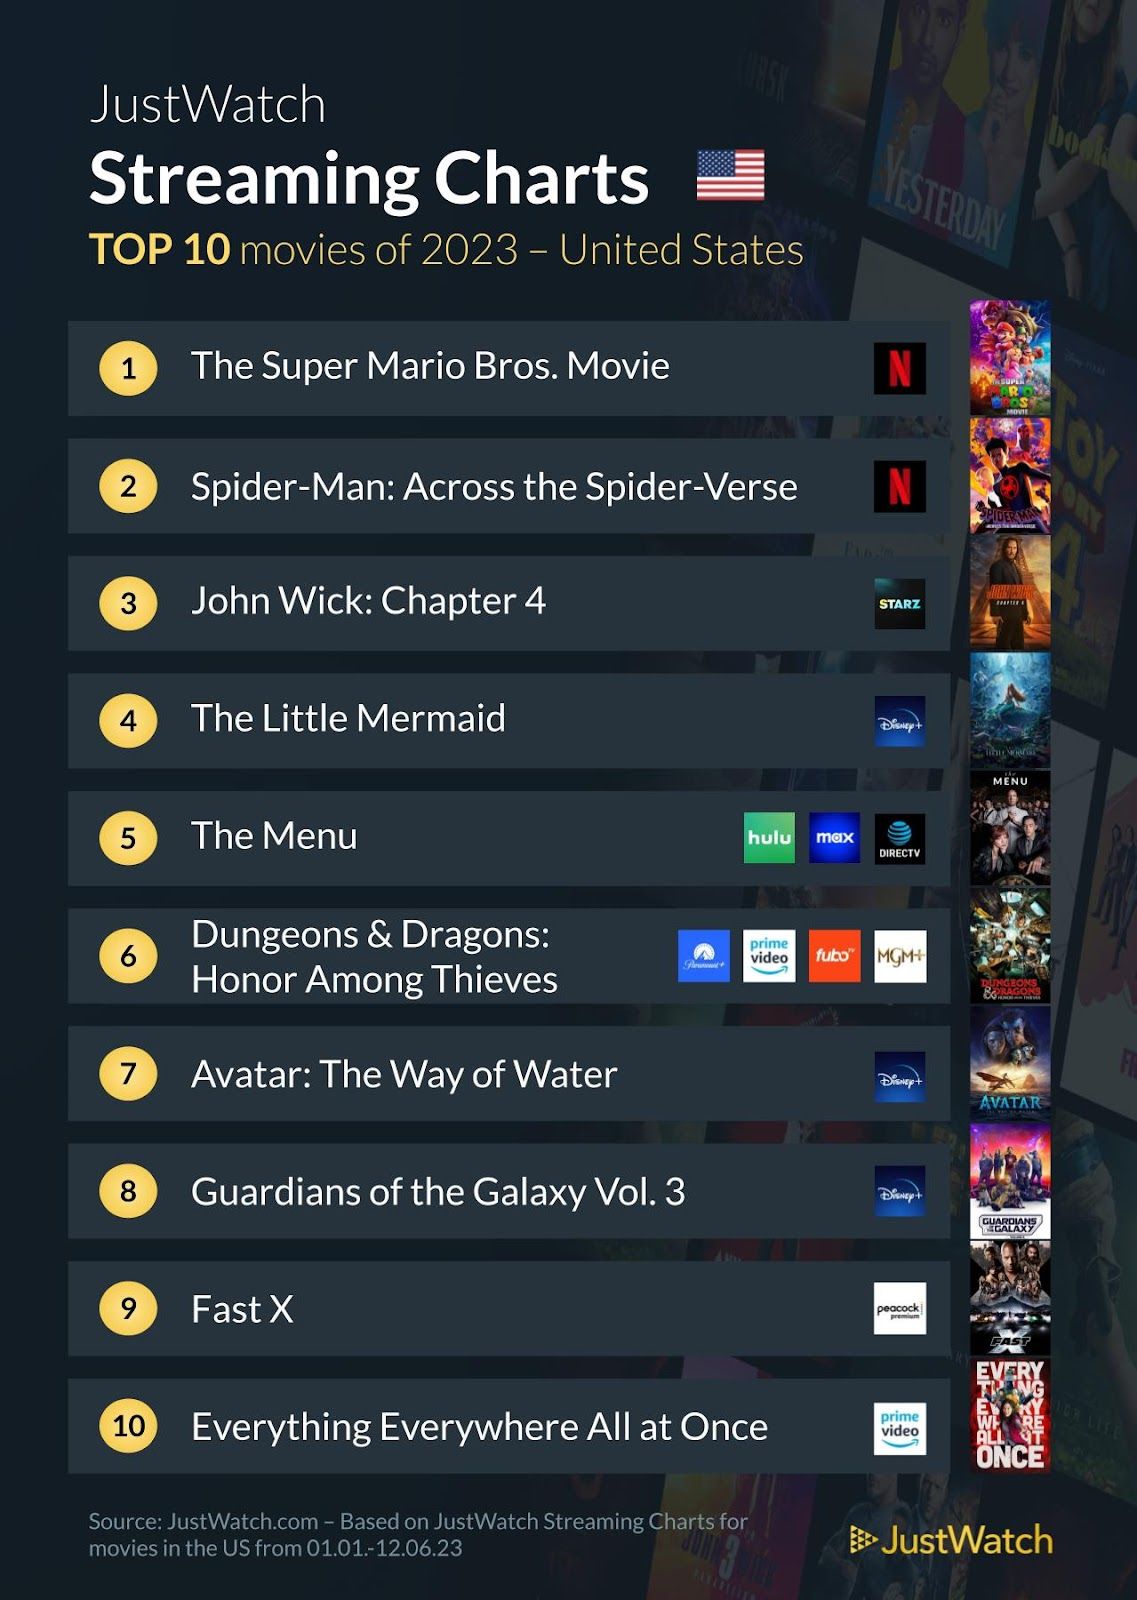 These Are The Top 10 Most Streamed Movies and TV Shows for 2023 - Newslibre